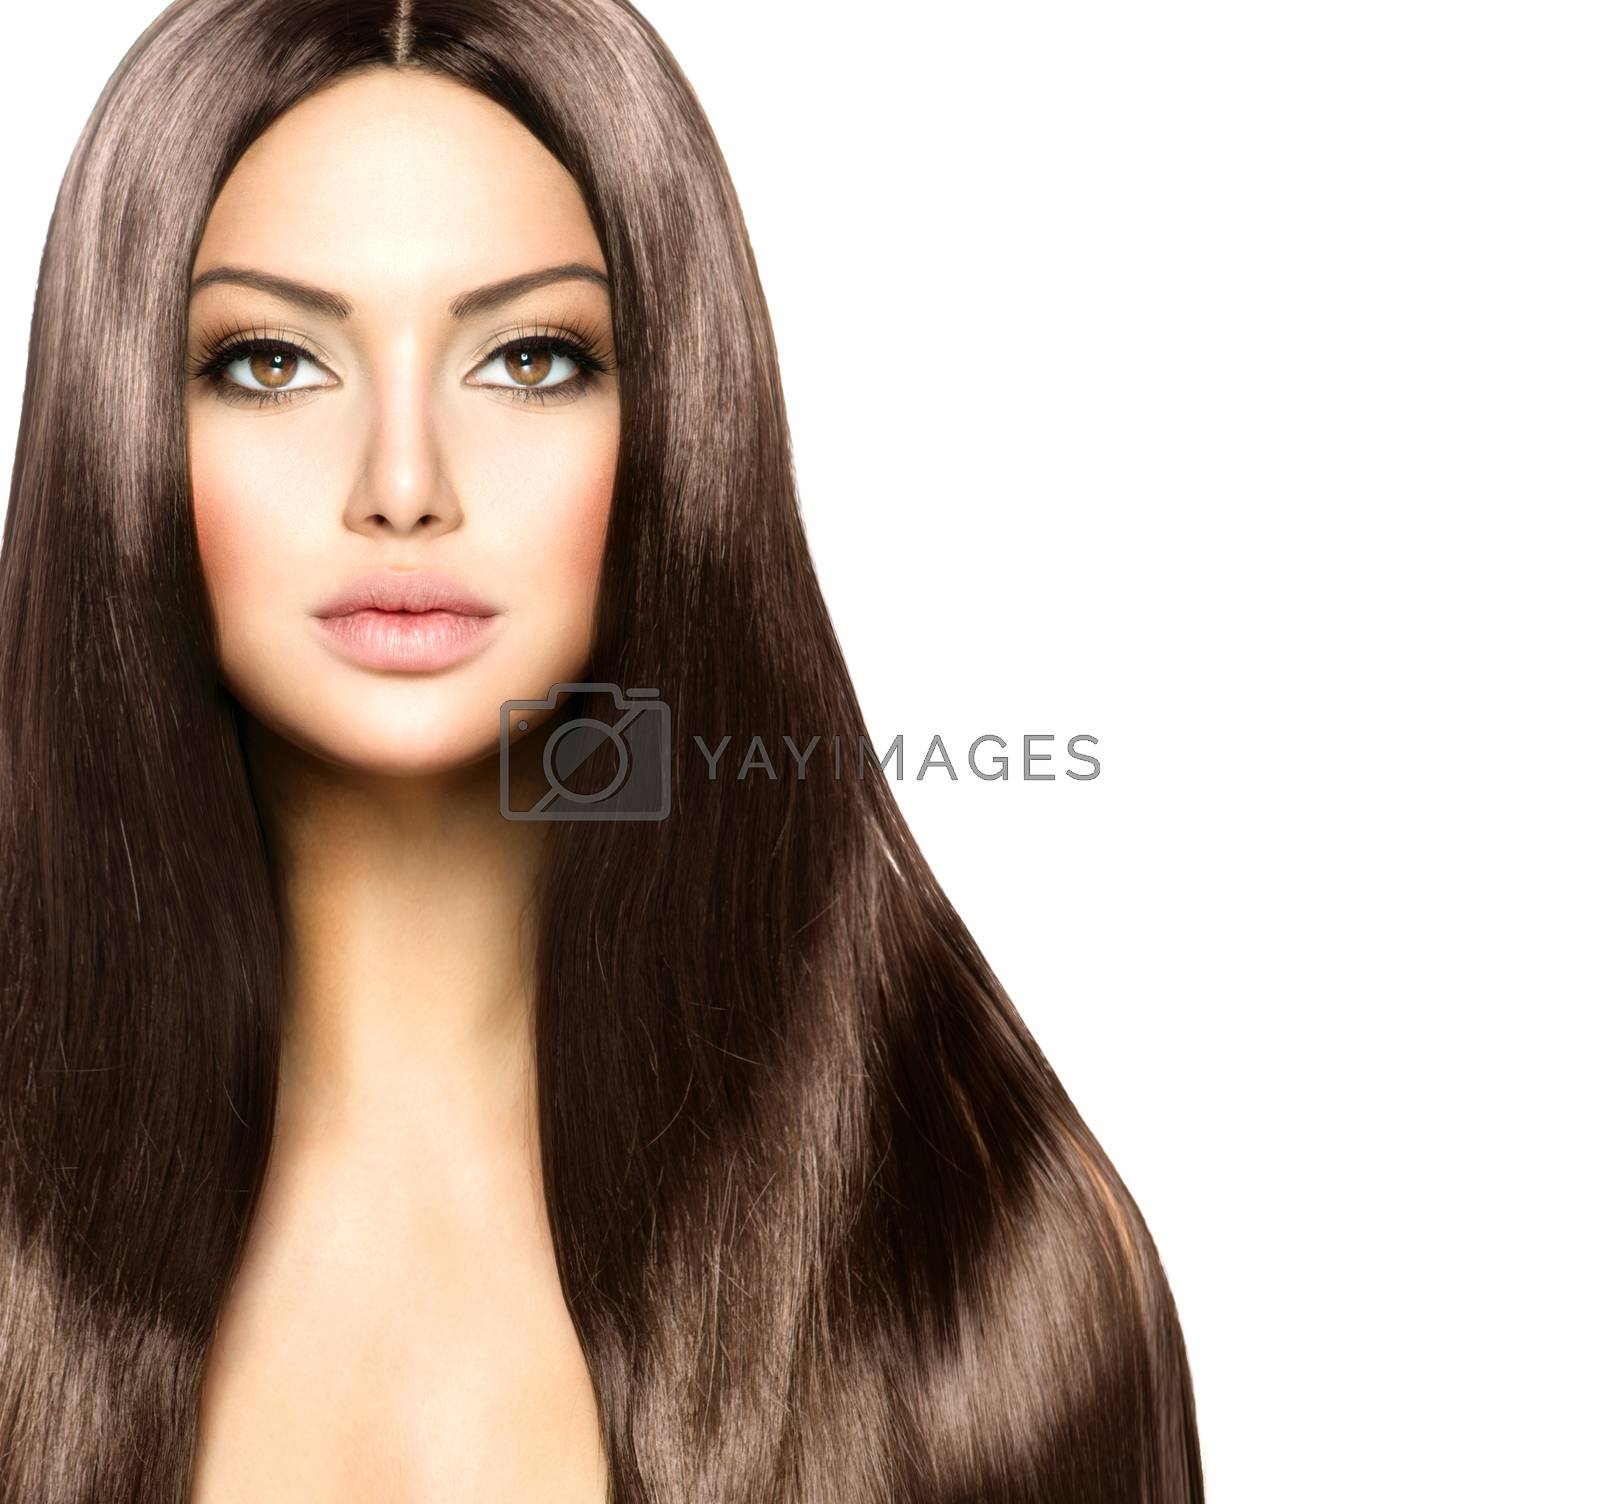 Royalty free image of Beauty Woman with Long Healthy and Shiny Smooth Brown Hair by SubbotinaA